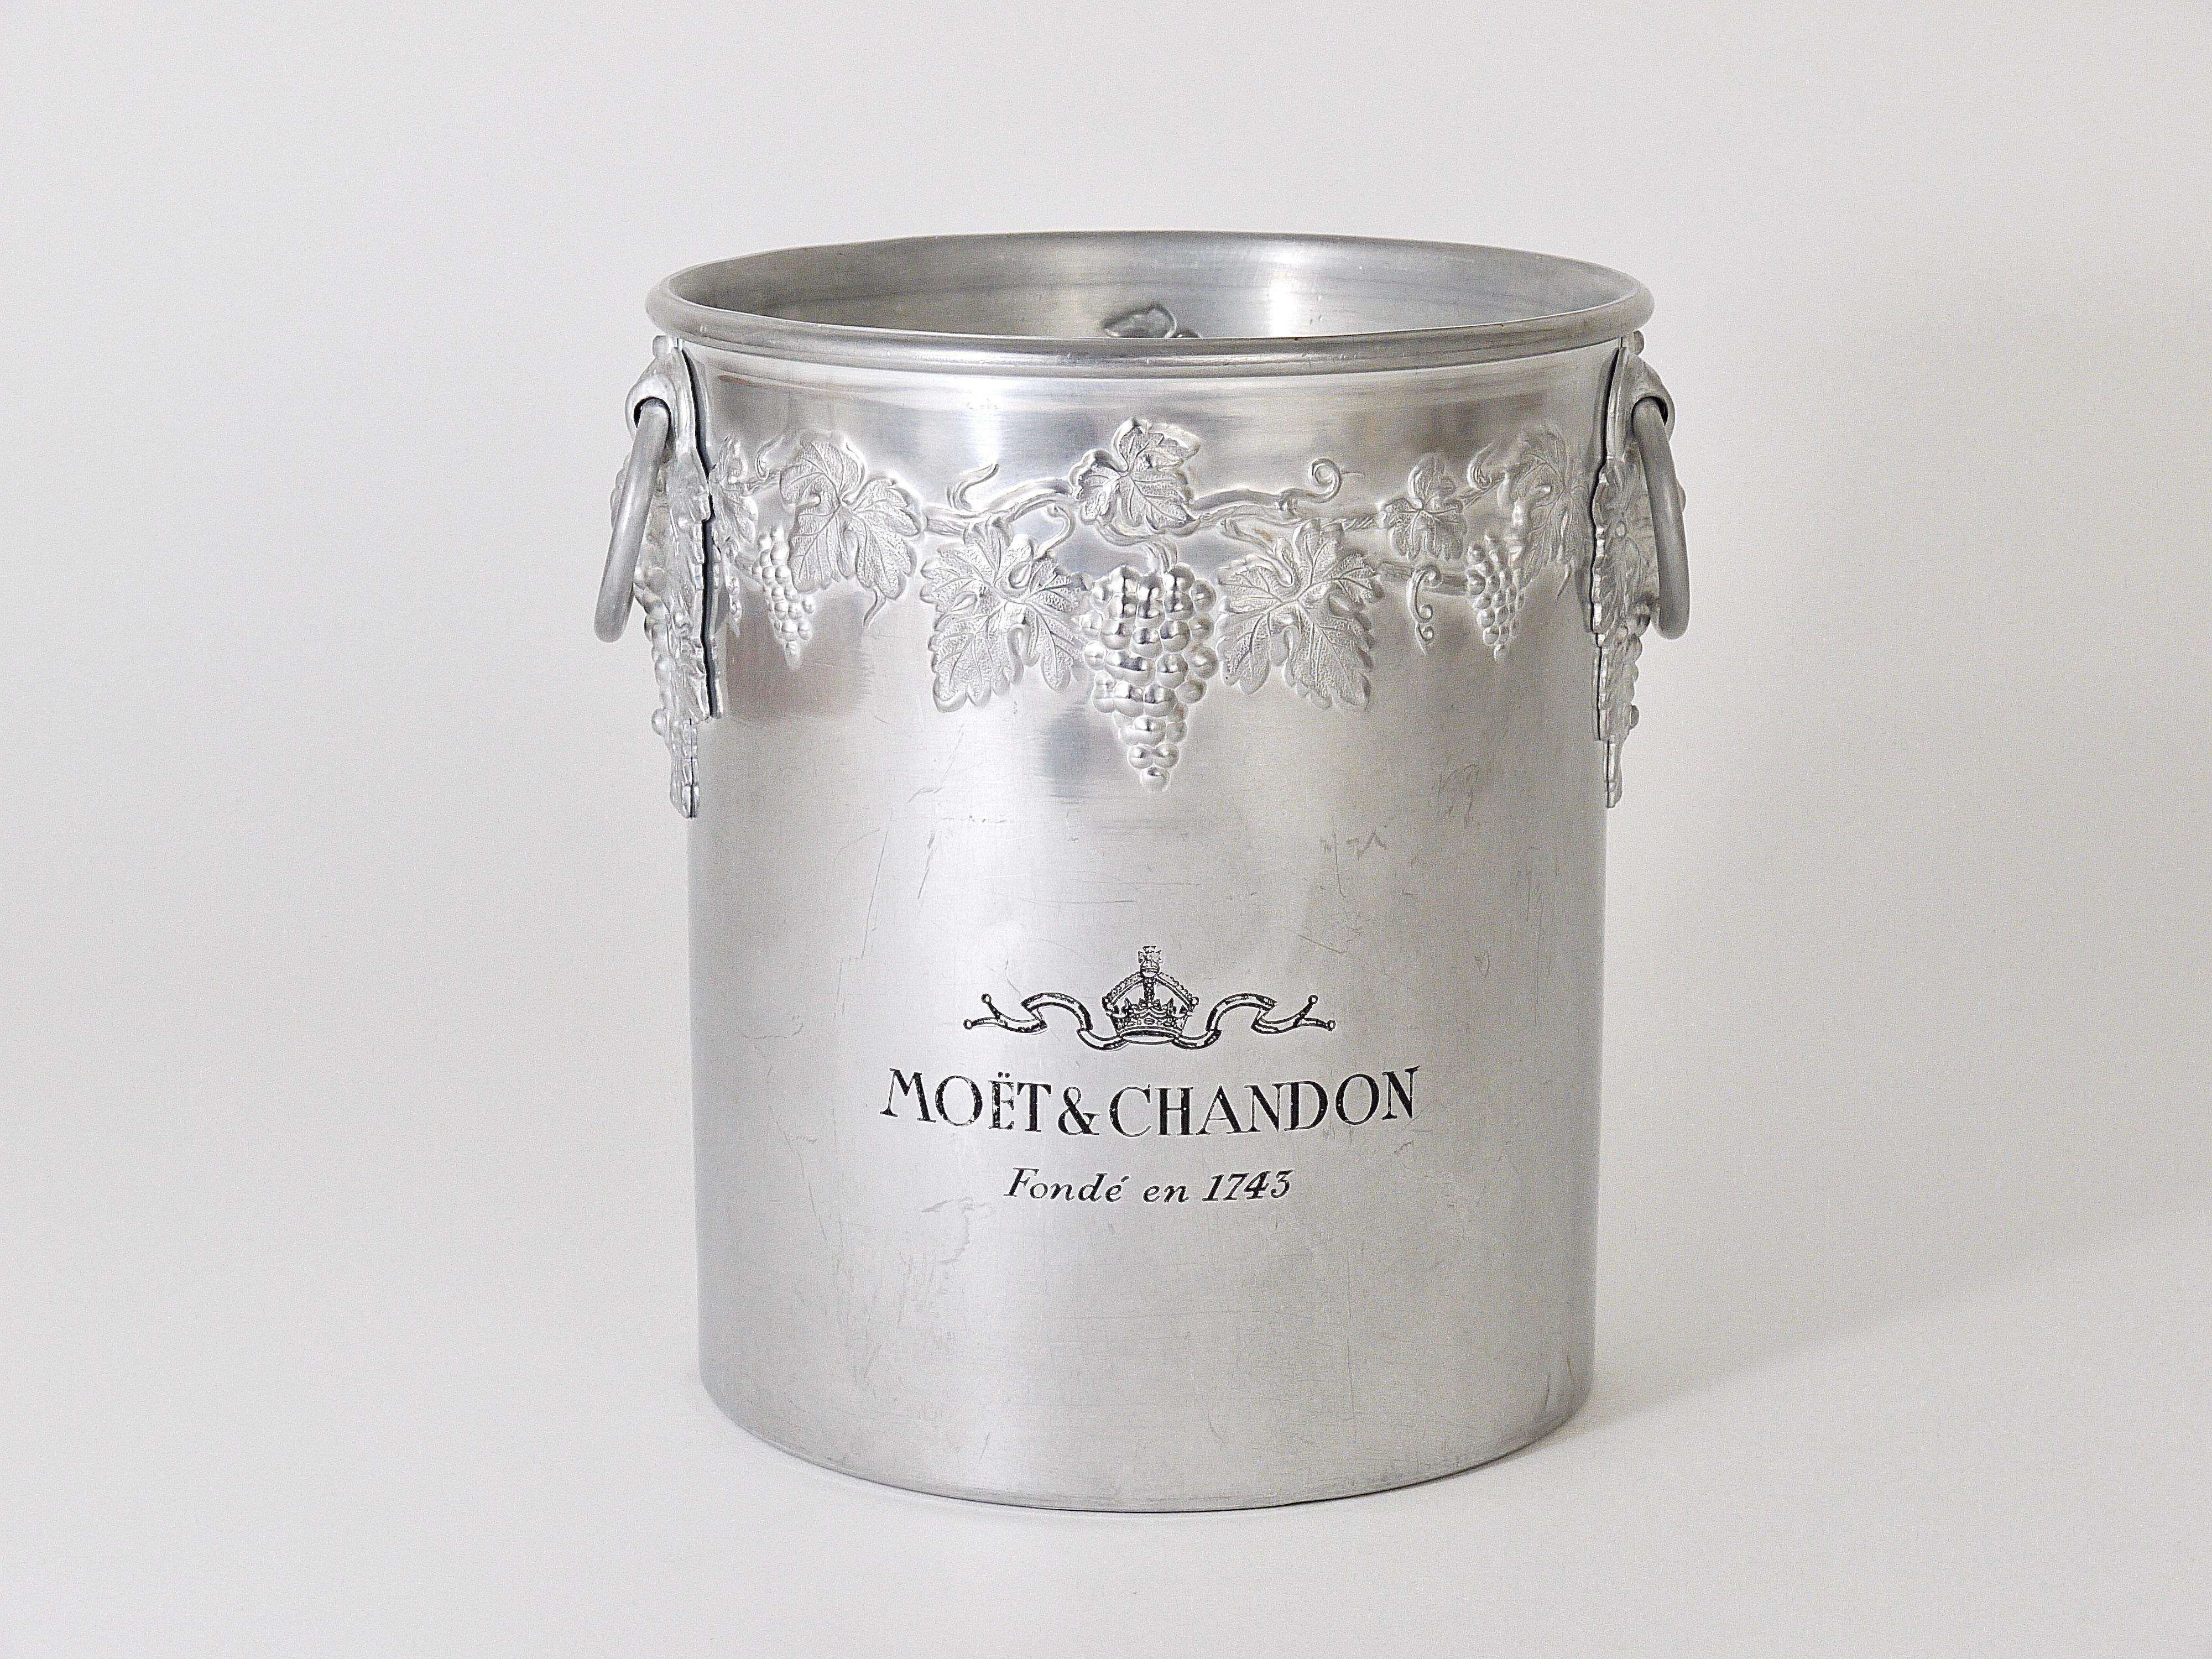 Aluminum Moet & Chandon Champagne Ice Bucket Bottle Cooler from the 1970s, France